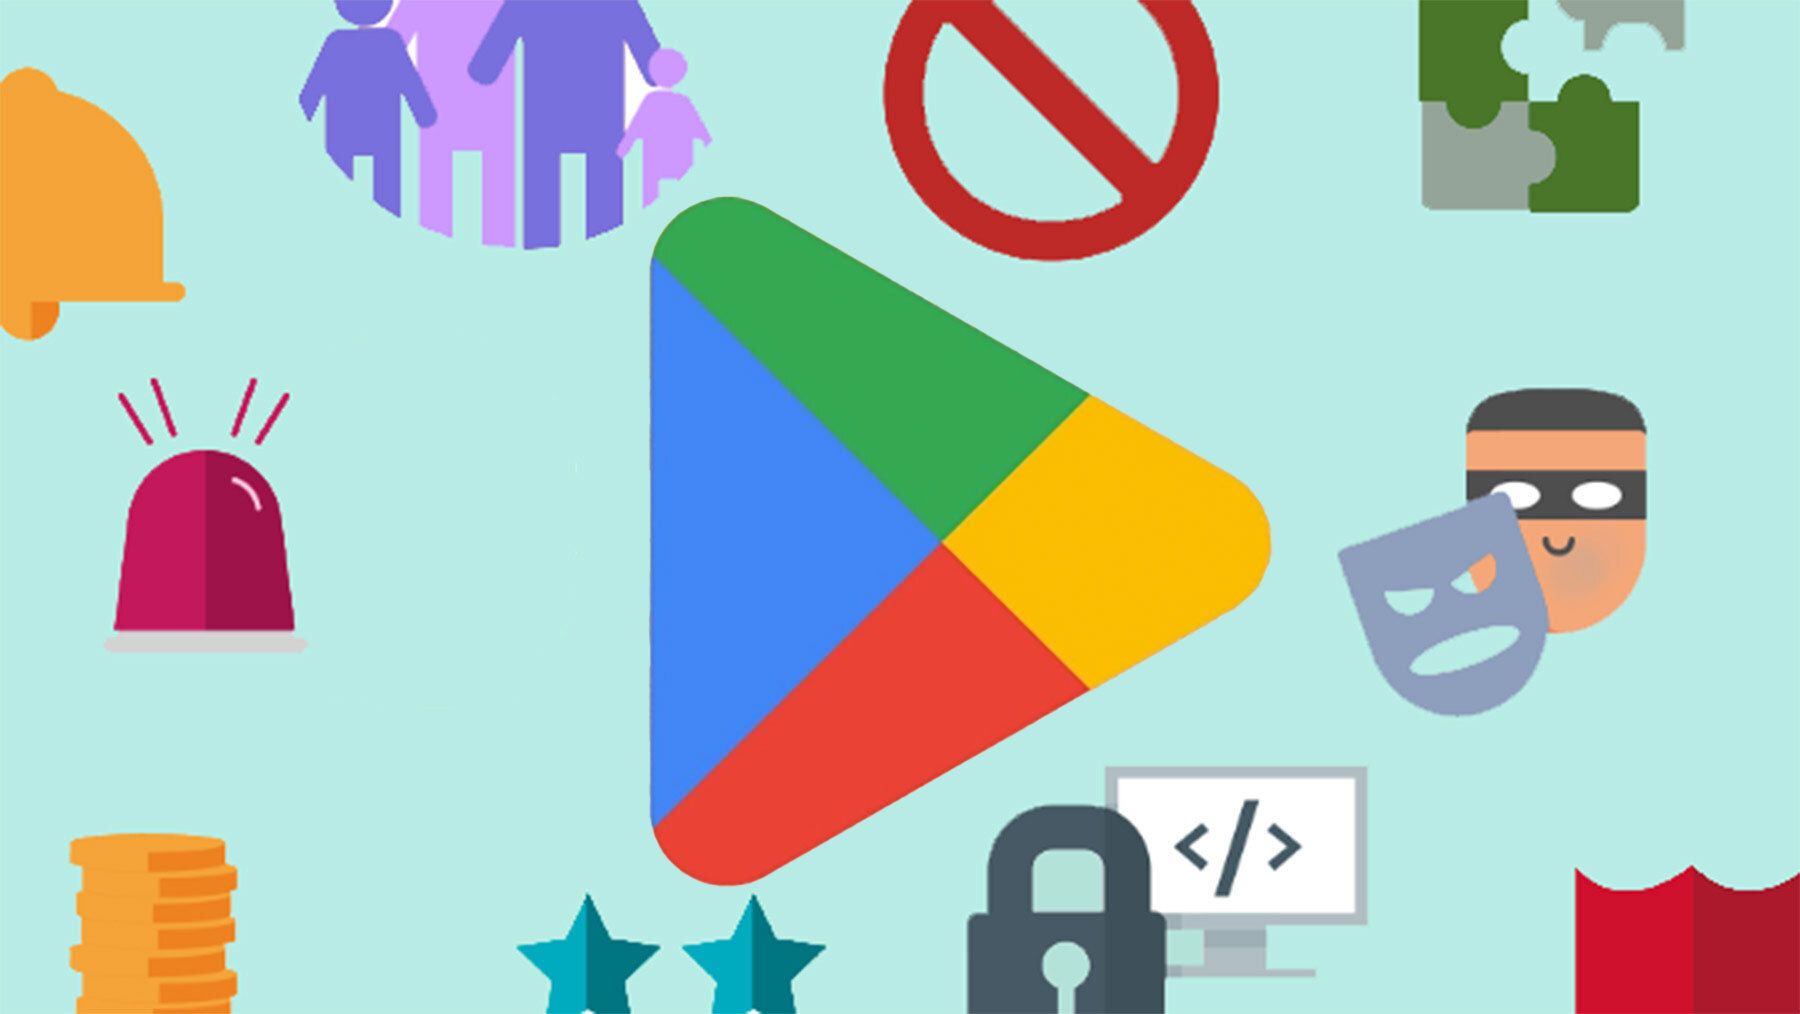 Google Play Policies: Important 2022 changes you need to know, The Gamers Dreams, thegamersdreams.com